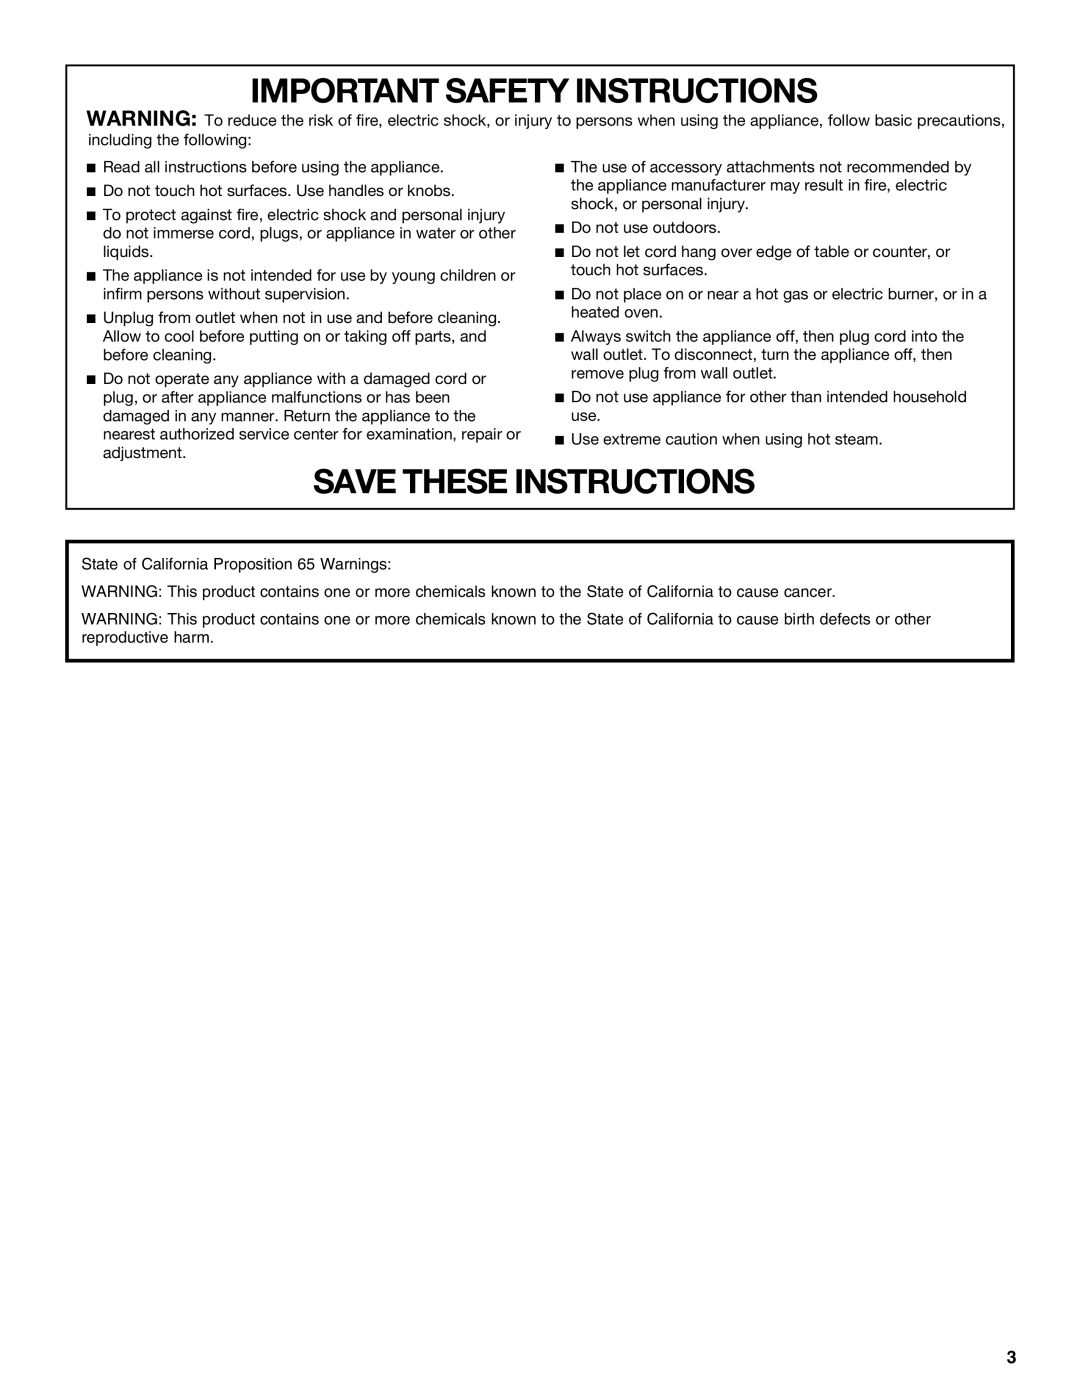 Jenn-Air JBC7624BS manual Important Safety Instructions, Save These Instructions 